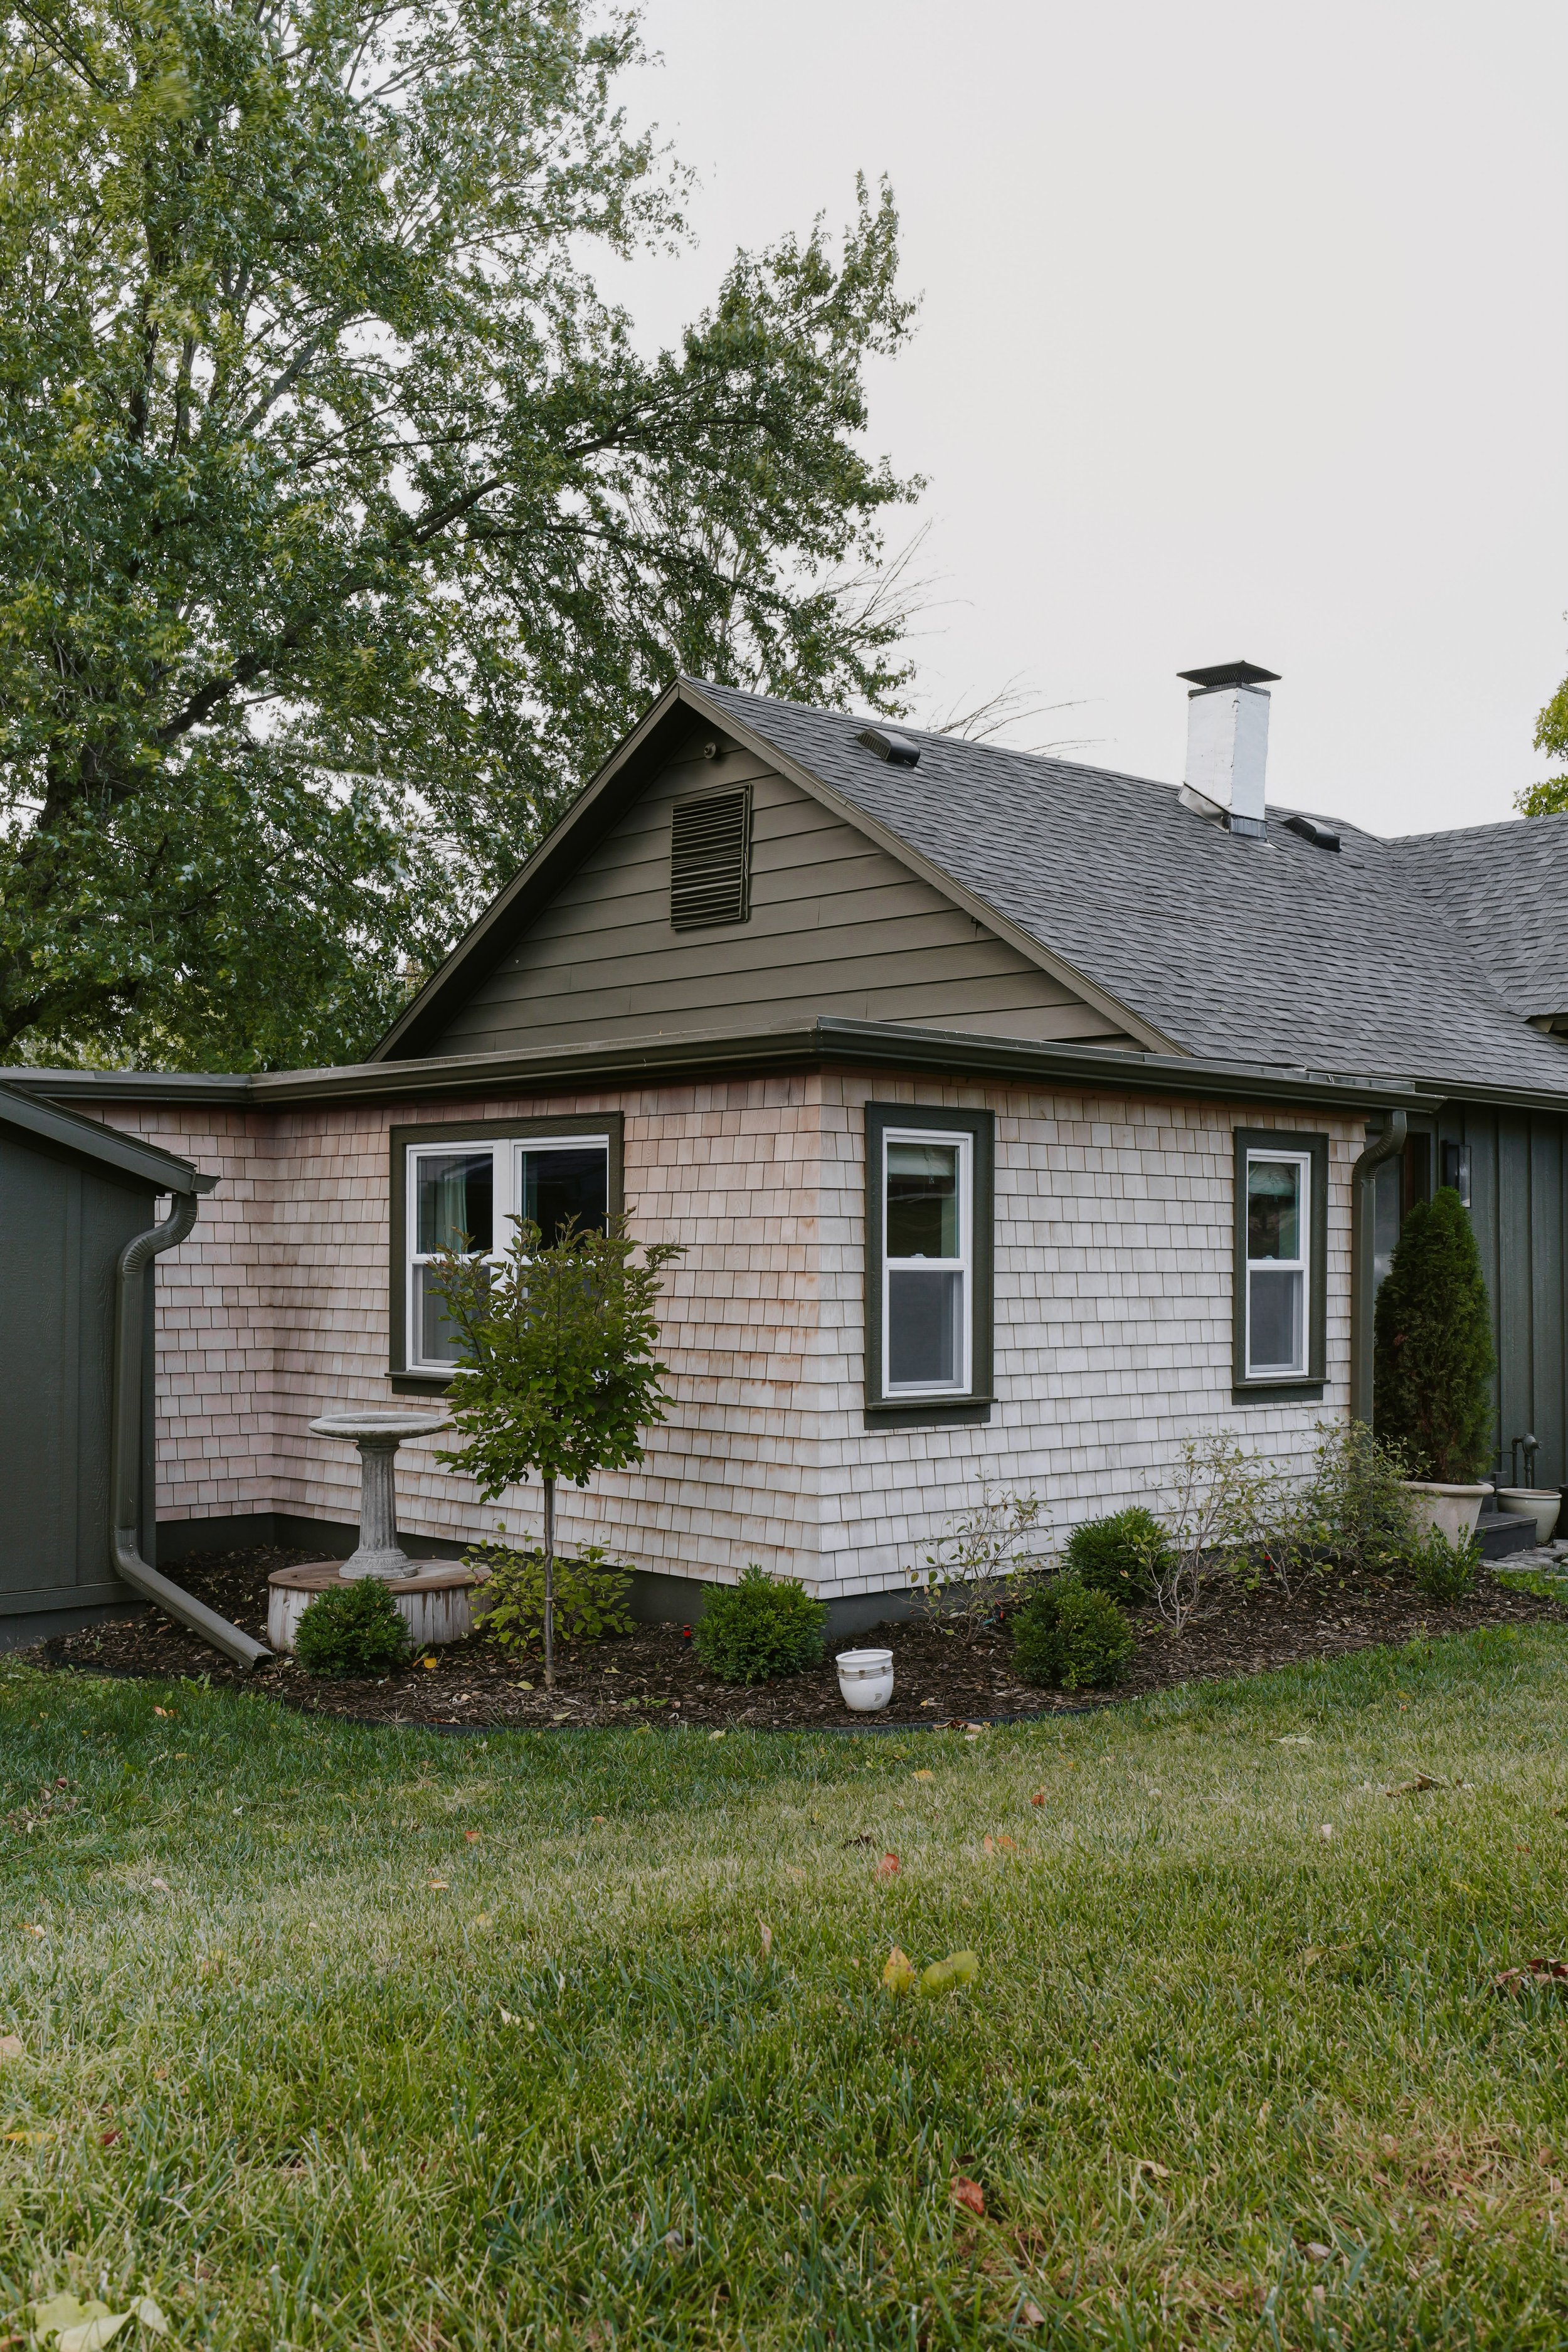 How our cedar shake siding color has changed after 3 years. Cedar siding FAQ's. How fast do cedar shake shingles gray? | Nadine Stay